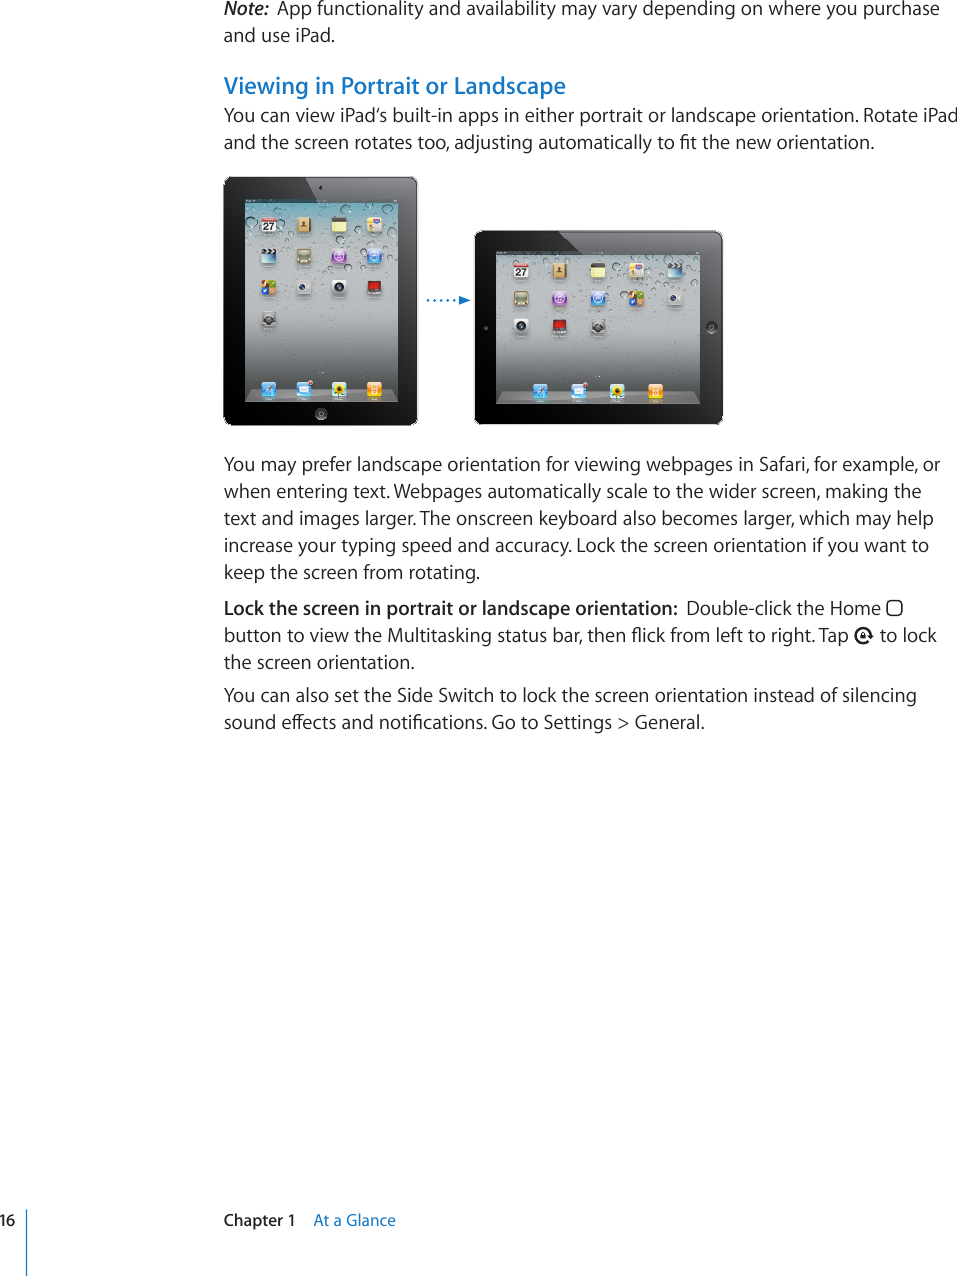 Note:  App functionality and availability may vary depending on where you purchase and use iPad.Viewing in Portrait or LandscapeYou can view iPad‘s built-in apps in either portrait or landscape orientation. Rotate iPad CPFVJGUETGGPTQVCVGUVQQCFLWUVKPICWVQOCVKECNN[VQ°VVJGPGYQTKGPVCVKQPYou may prefer landscape orientation for viewing webpages in Safari, for example, or when entering text. Webpages automatically scale to the wider screen, making the text and images larger. The onscreen keyboard also becomes larger, which may help increase your typing speed and accuracy. Lock the screen orientation if you want to keep the screen from rotating.Lock the screen in portrait or landscape orientation:  Double-click the Home   DWVVQPVQXKGYVJG/WNVKVCUMKPIUVCVWUDCTVJGP±KEMHTQONGHVVQTKIJV6CR  to lock the screen orientation.You can also set the Side Switch to lock the screen orientation instead of silencing UQWPFGÒGEVUCPFPQVK°ECVKQPU)QVQ5GVVKPIU )GPGTCN16 Chapter 1    At a Glance